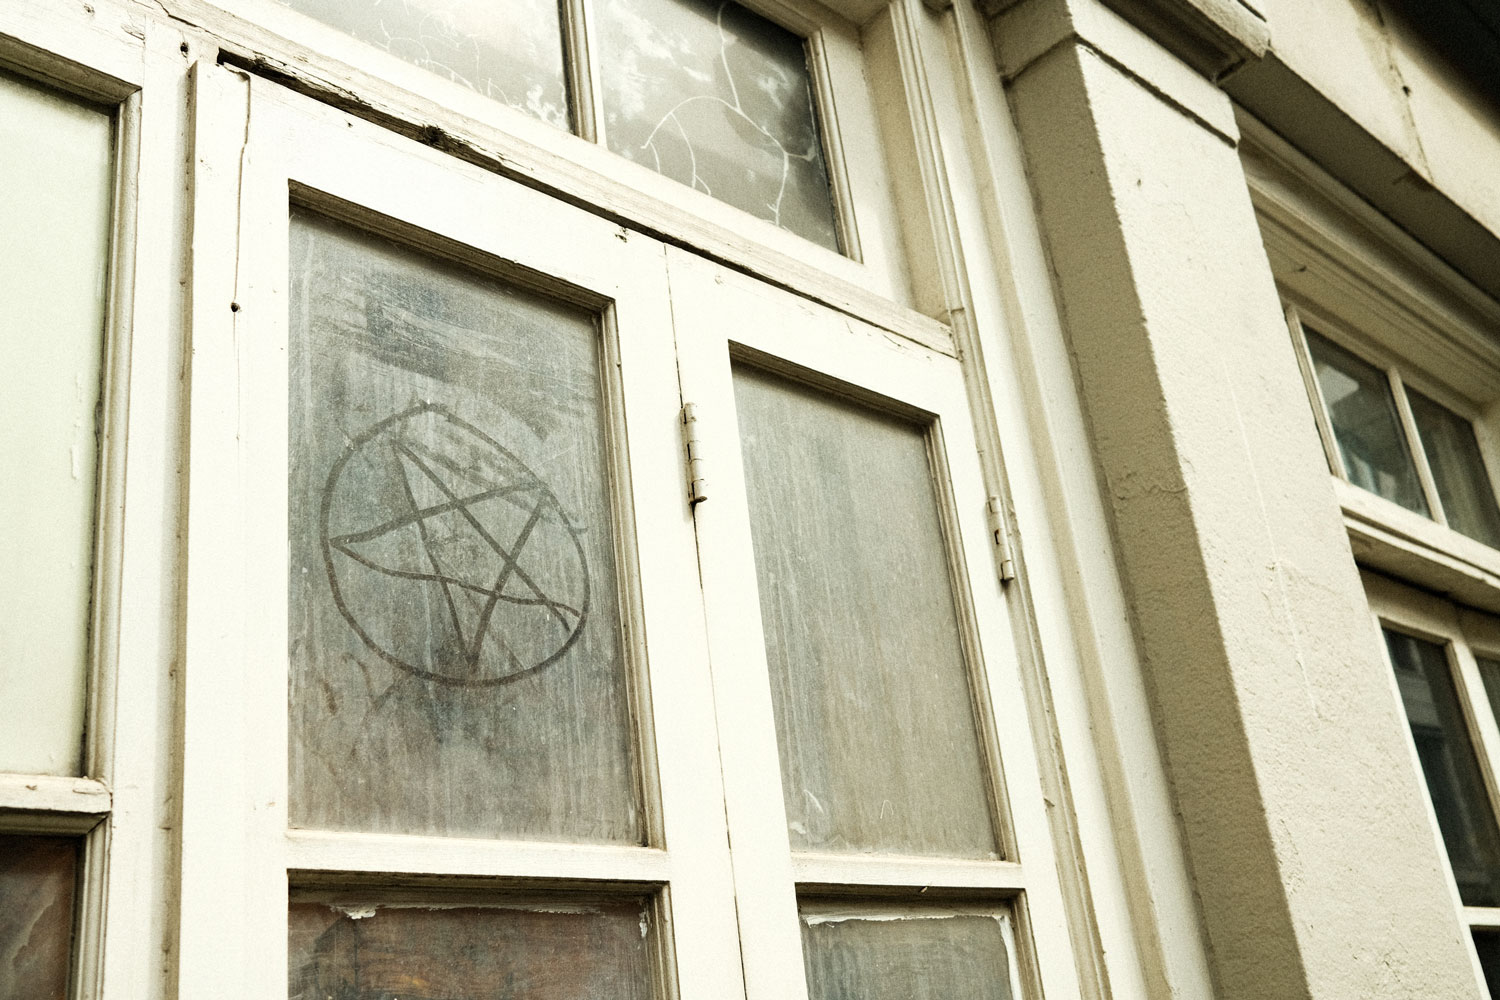 Close up photo of the front of an off-white, dusty beige building with wooden doors. The glass in the doors is very dirty and someone has used their finger to draw a star with a circle around it in the dirty glass.